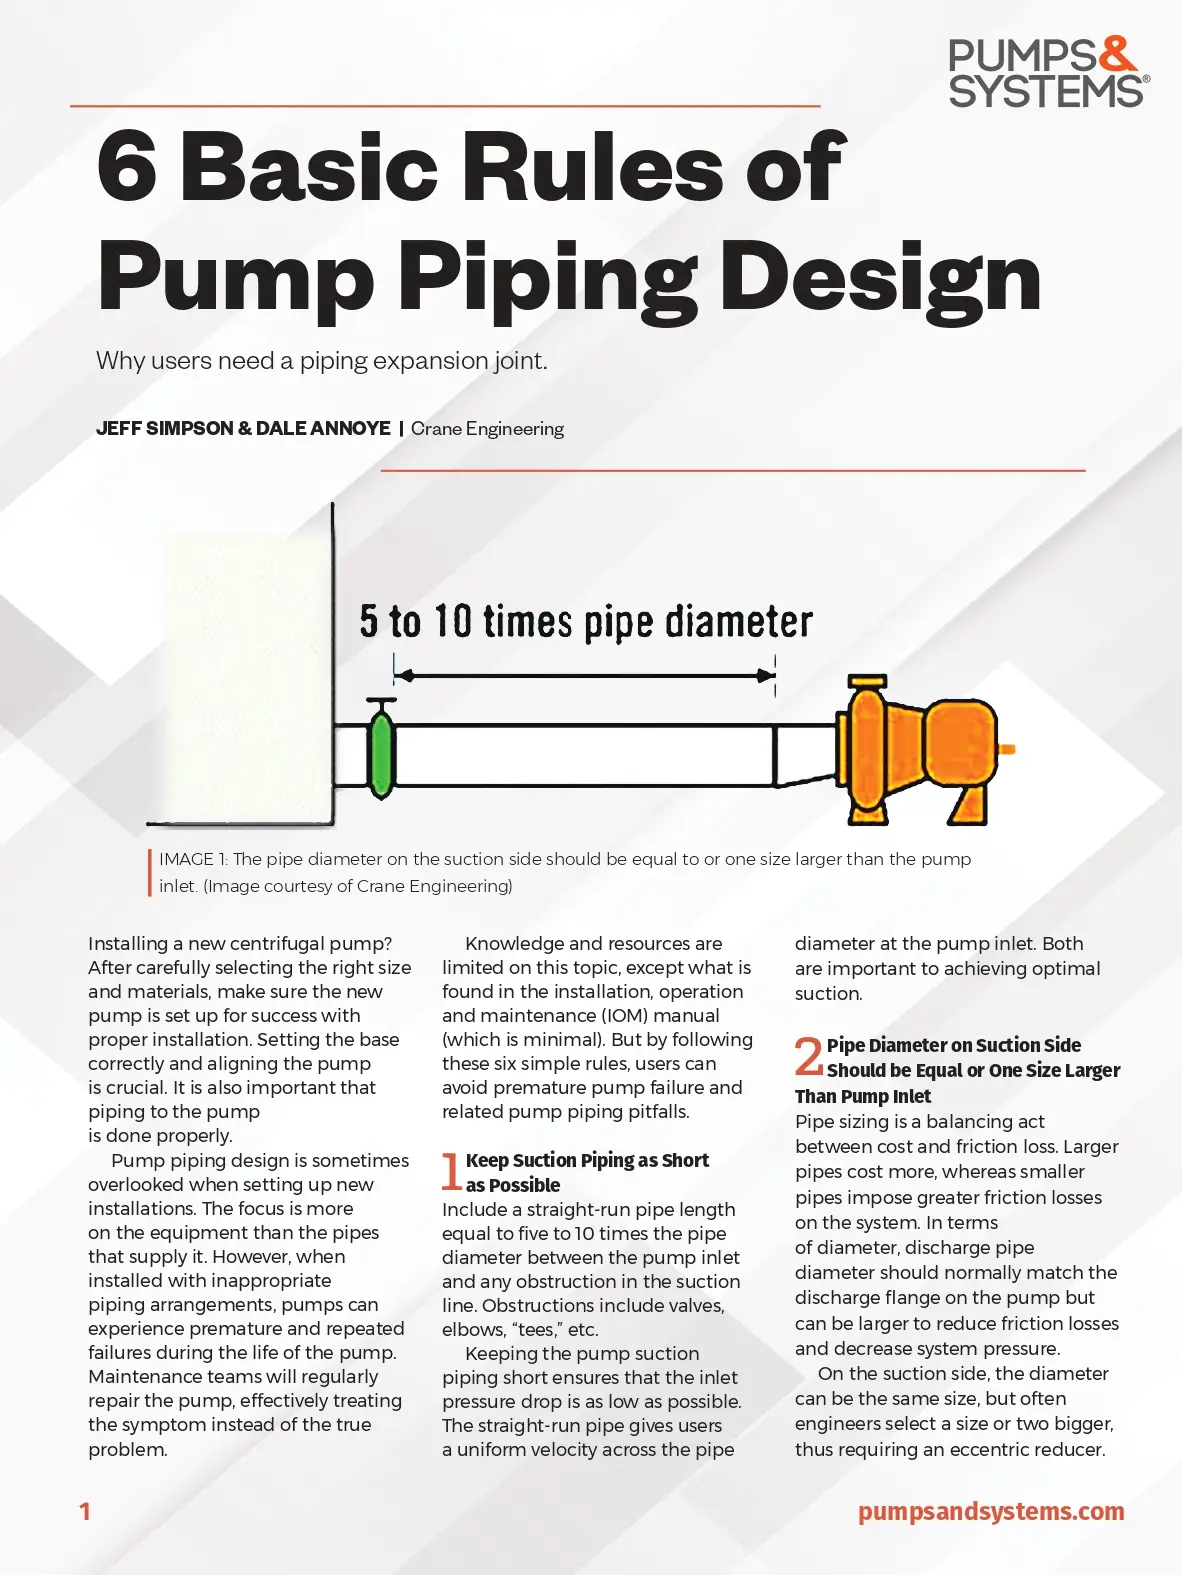 6 Basic Rules Of Pump Piping Design